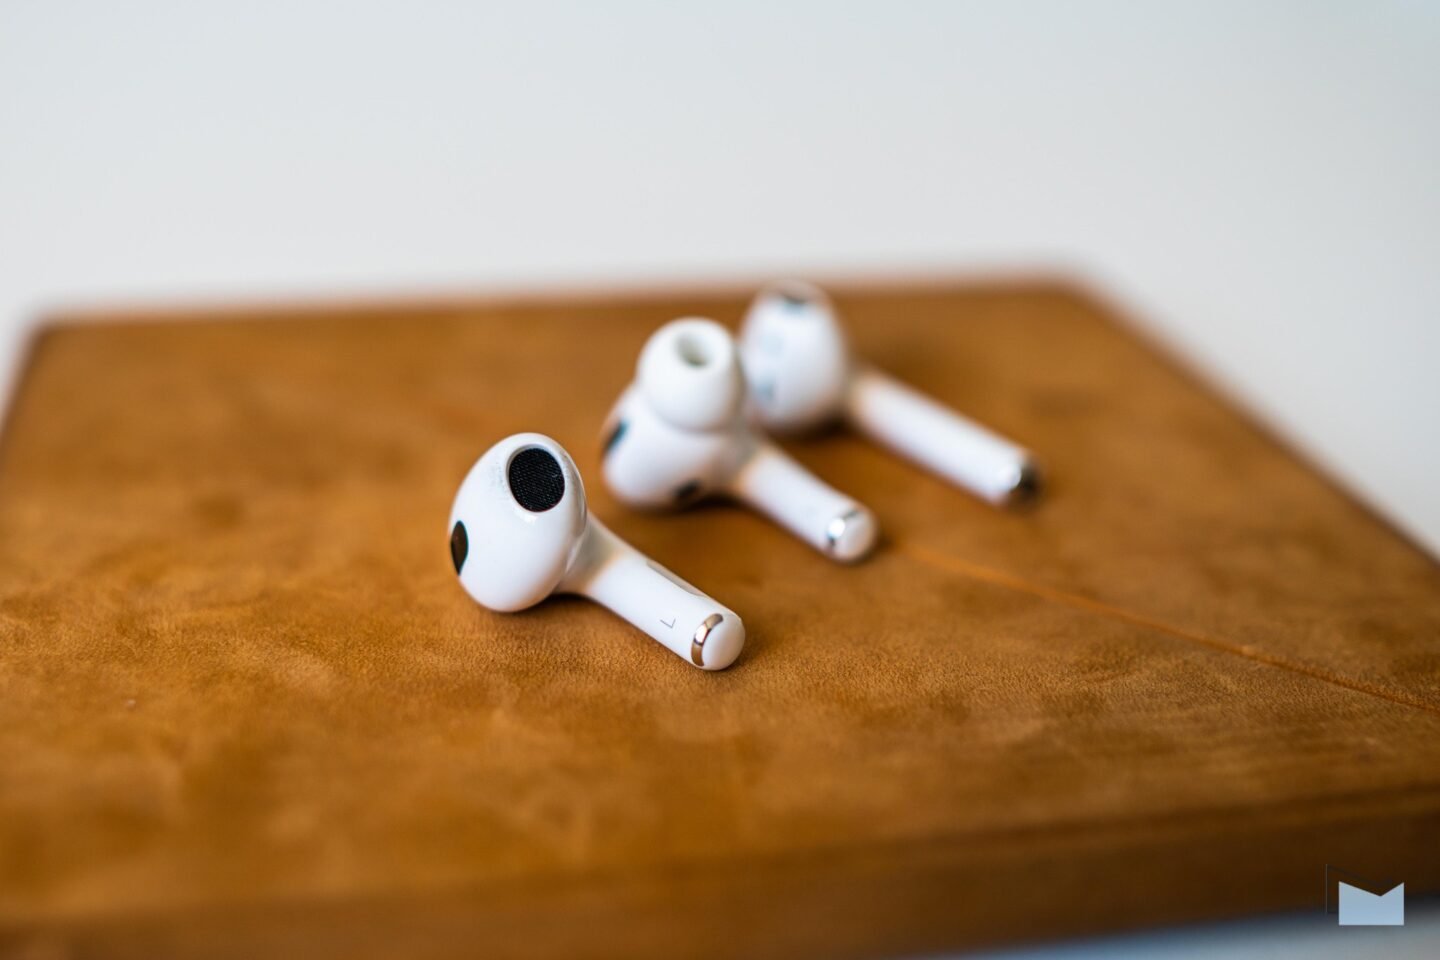 Mass production of the new AirPods Max, HomePod mini and budget AirPods will begin in the second half of 2024